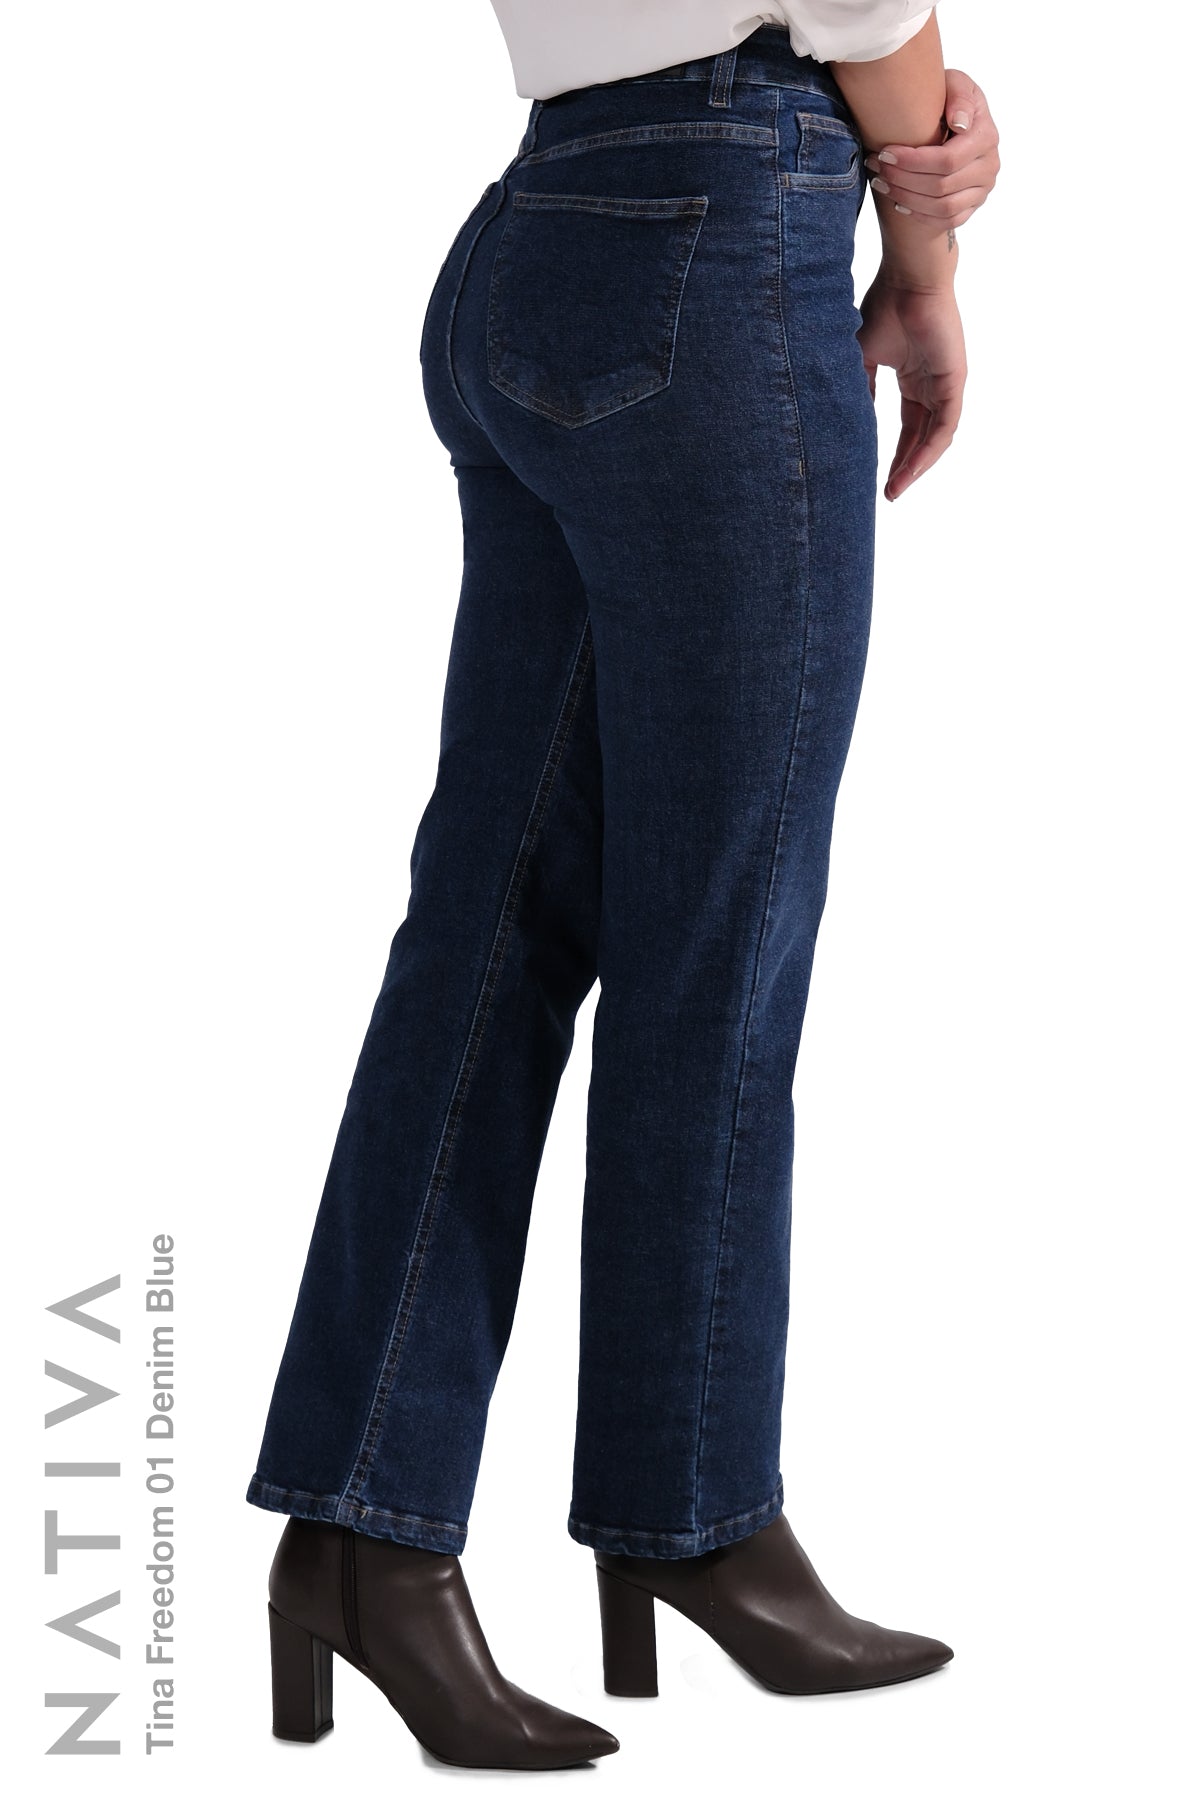 NATIVA,STRETCH JEANS, TINA FREEDOM 01 DENIM BLUE. High-Rise  Classic Straight Leg Jeans ESFD  (Extreme Stretch Flattering Denim)  Fabric Ultra Comfortable Relaxed Fit  Solid Color